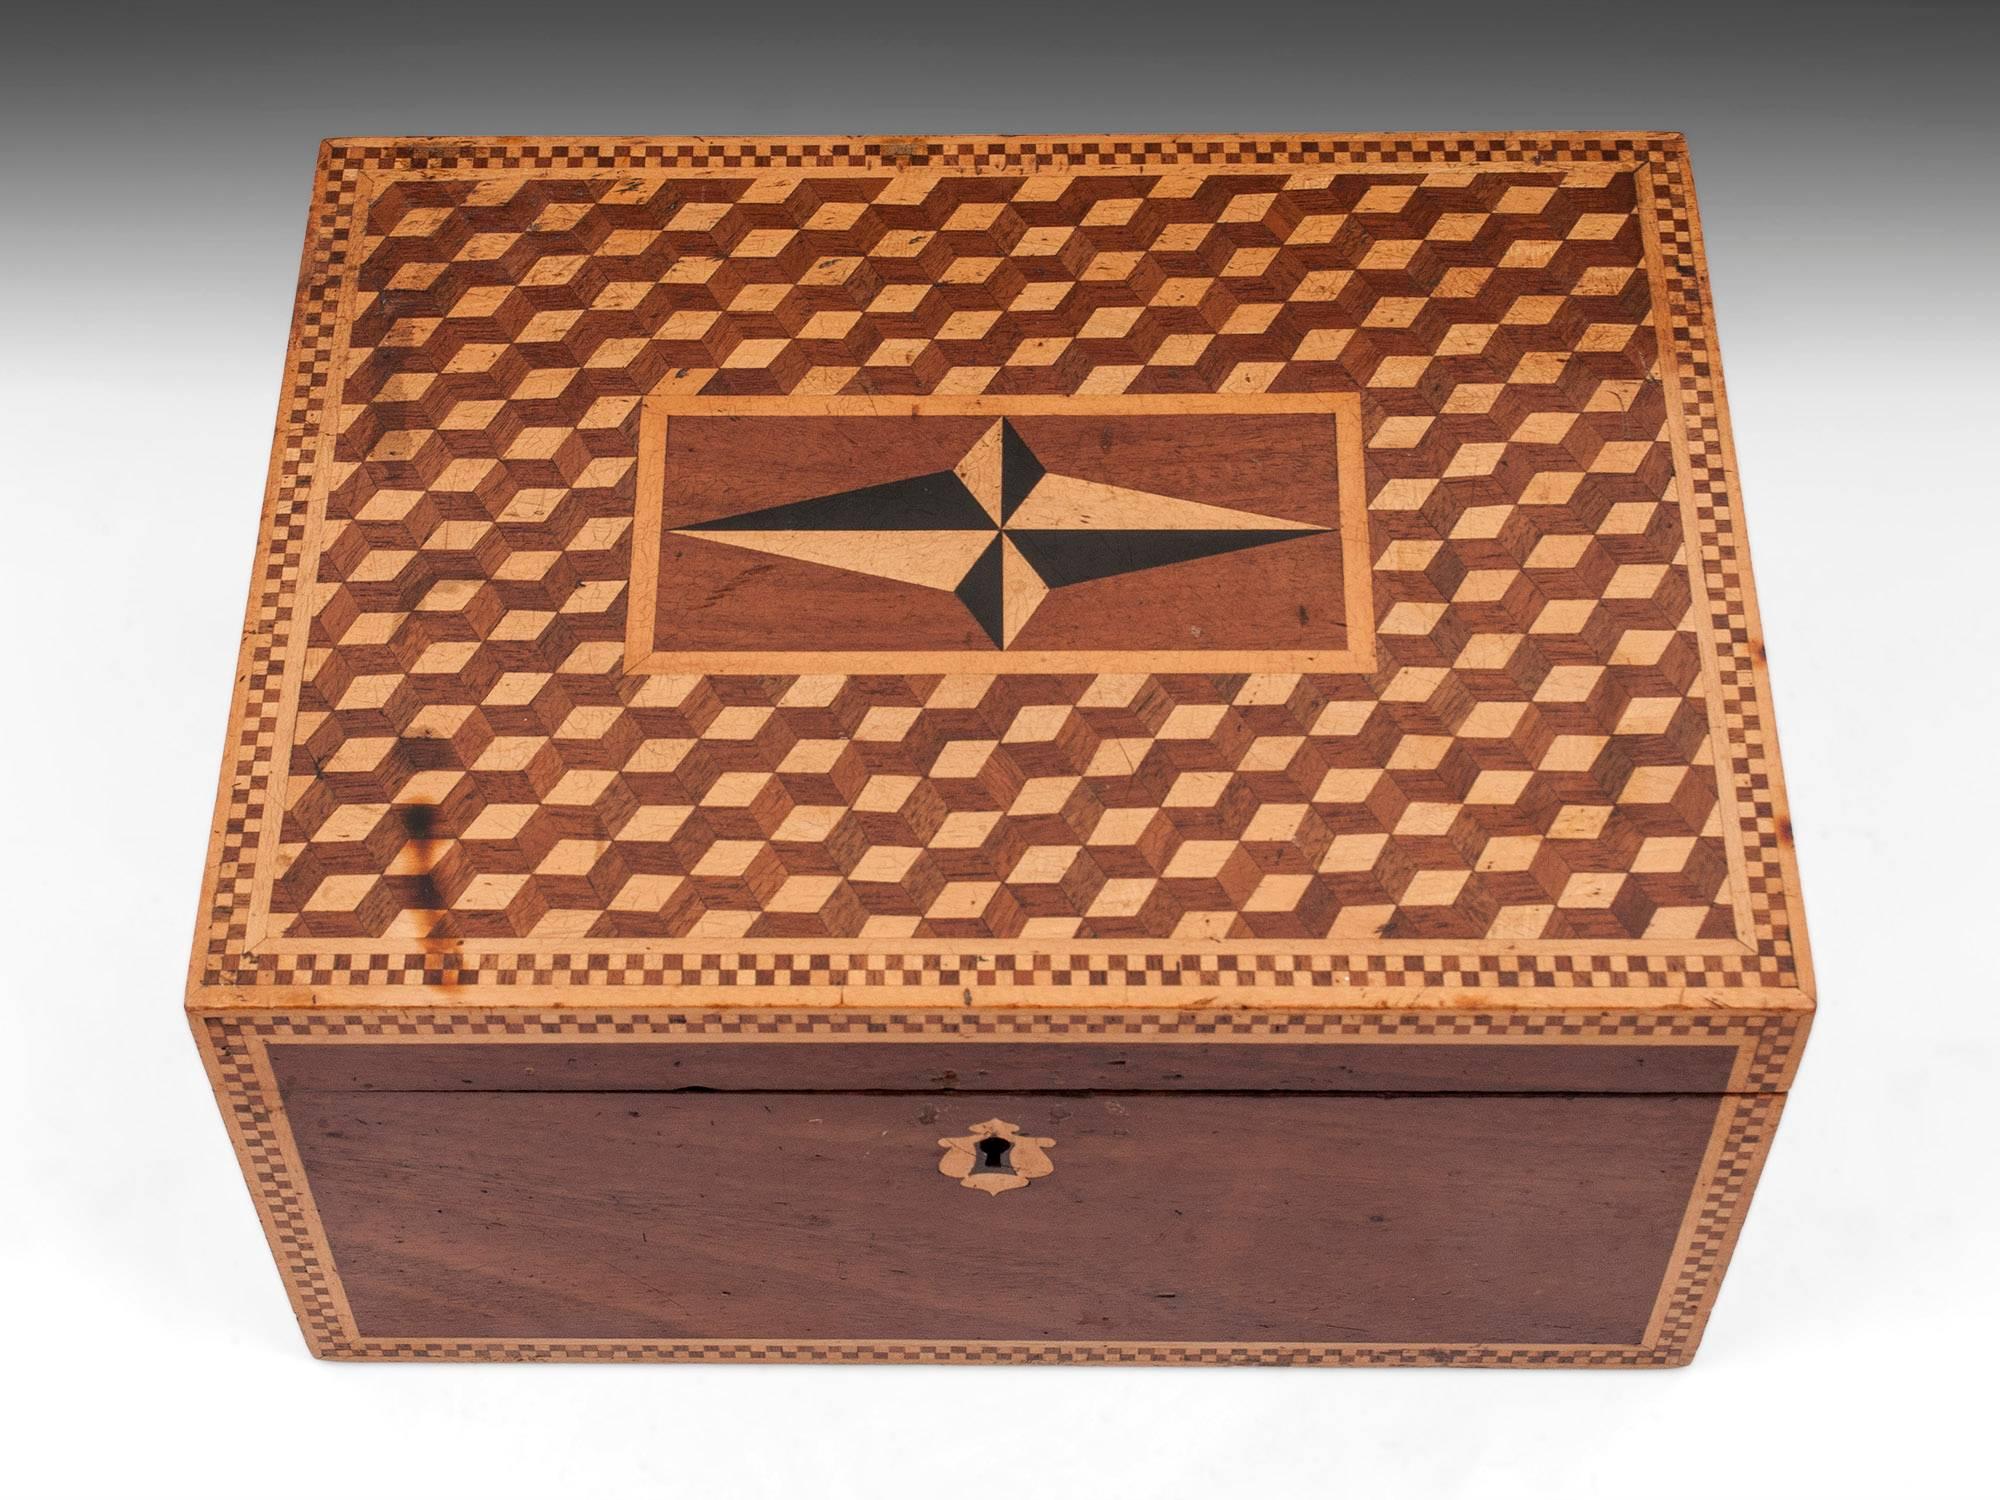 Antique box made of mahogany with an interesting cube perspective design on the top with a four point nautical star in the center.

The interior is lined with black leather paper and purple velvet.

The exterior shows signs of age and has one or